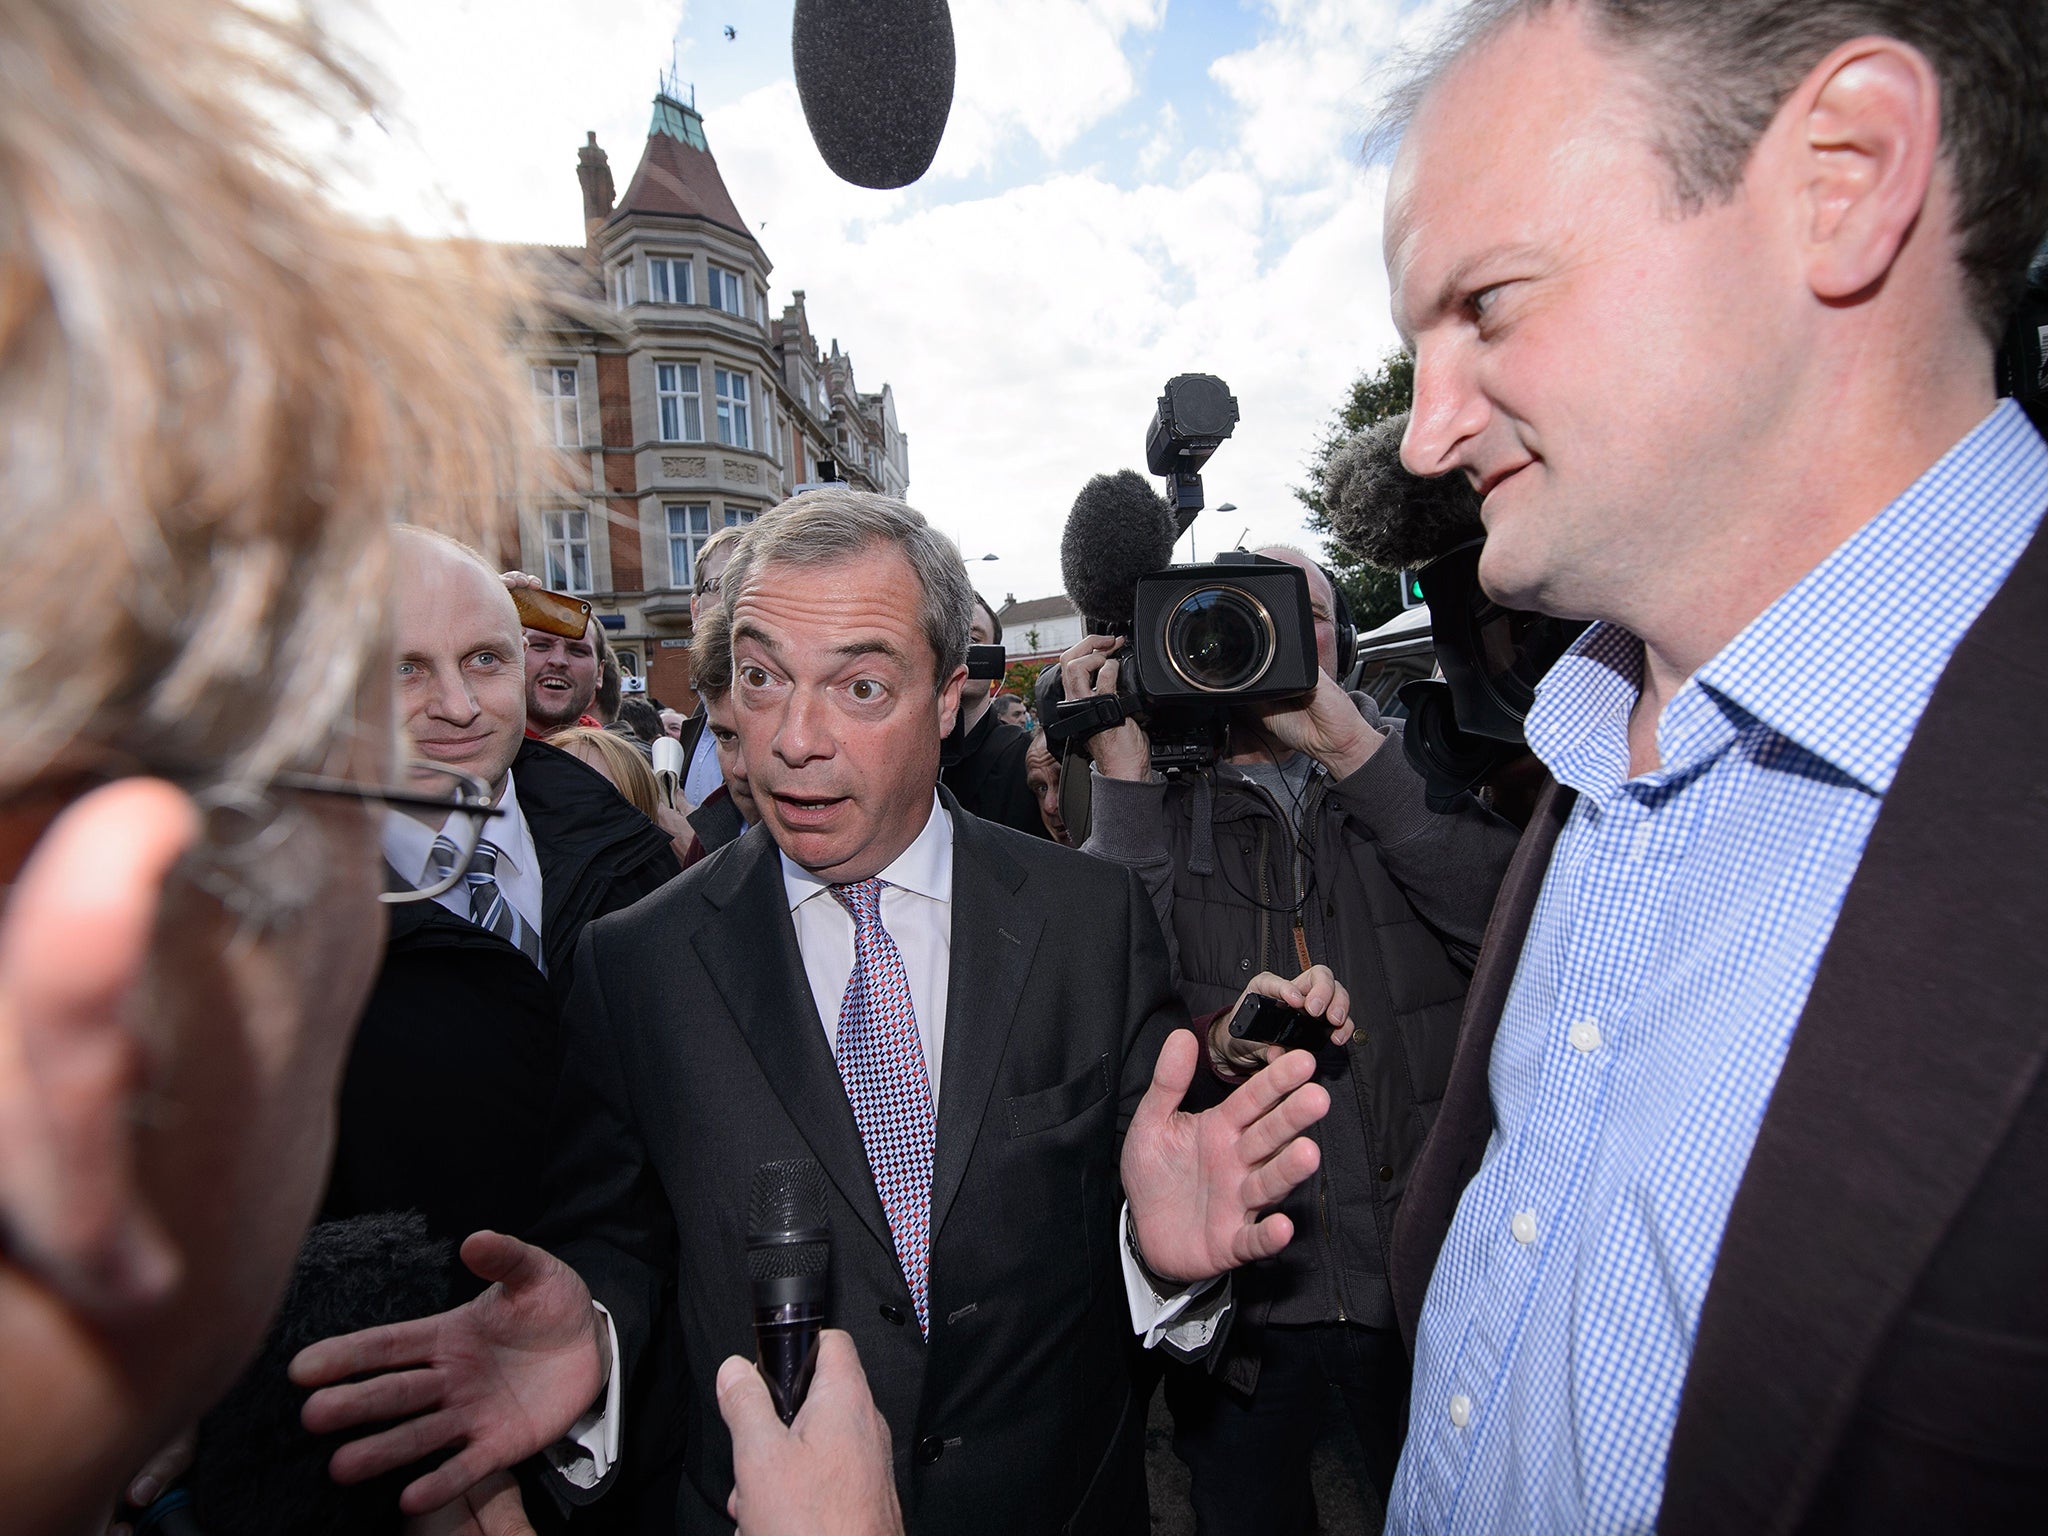 Ukip leader Nigel Farage with newly elected Ukip MP Douglas Carswell (right) after the party's win in Clacton